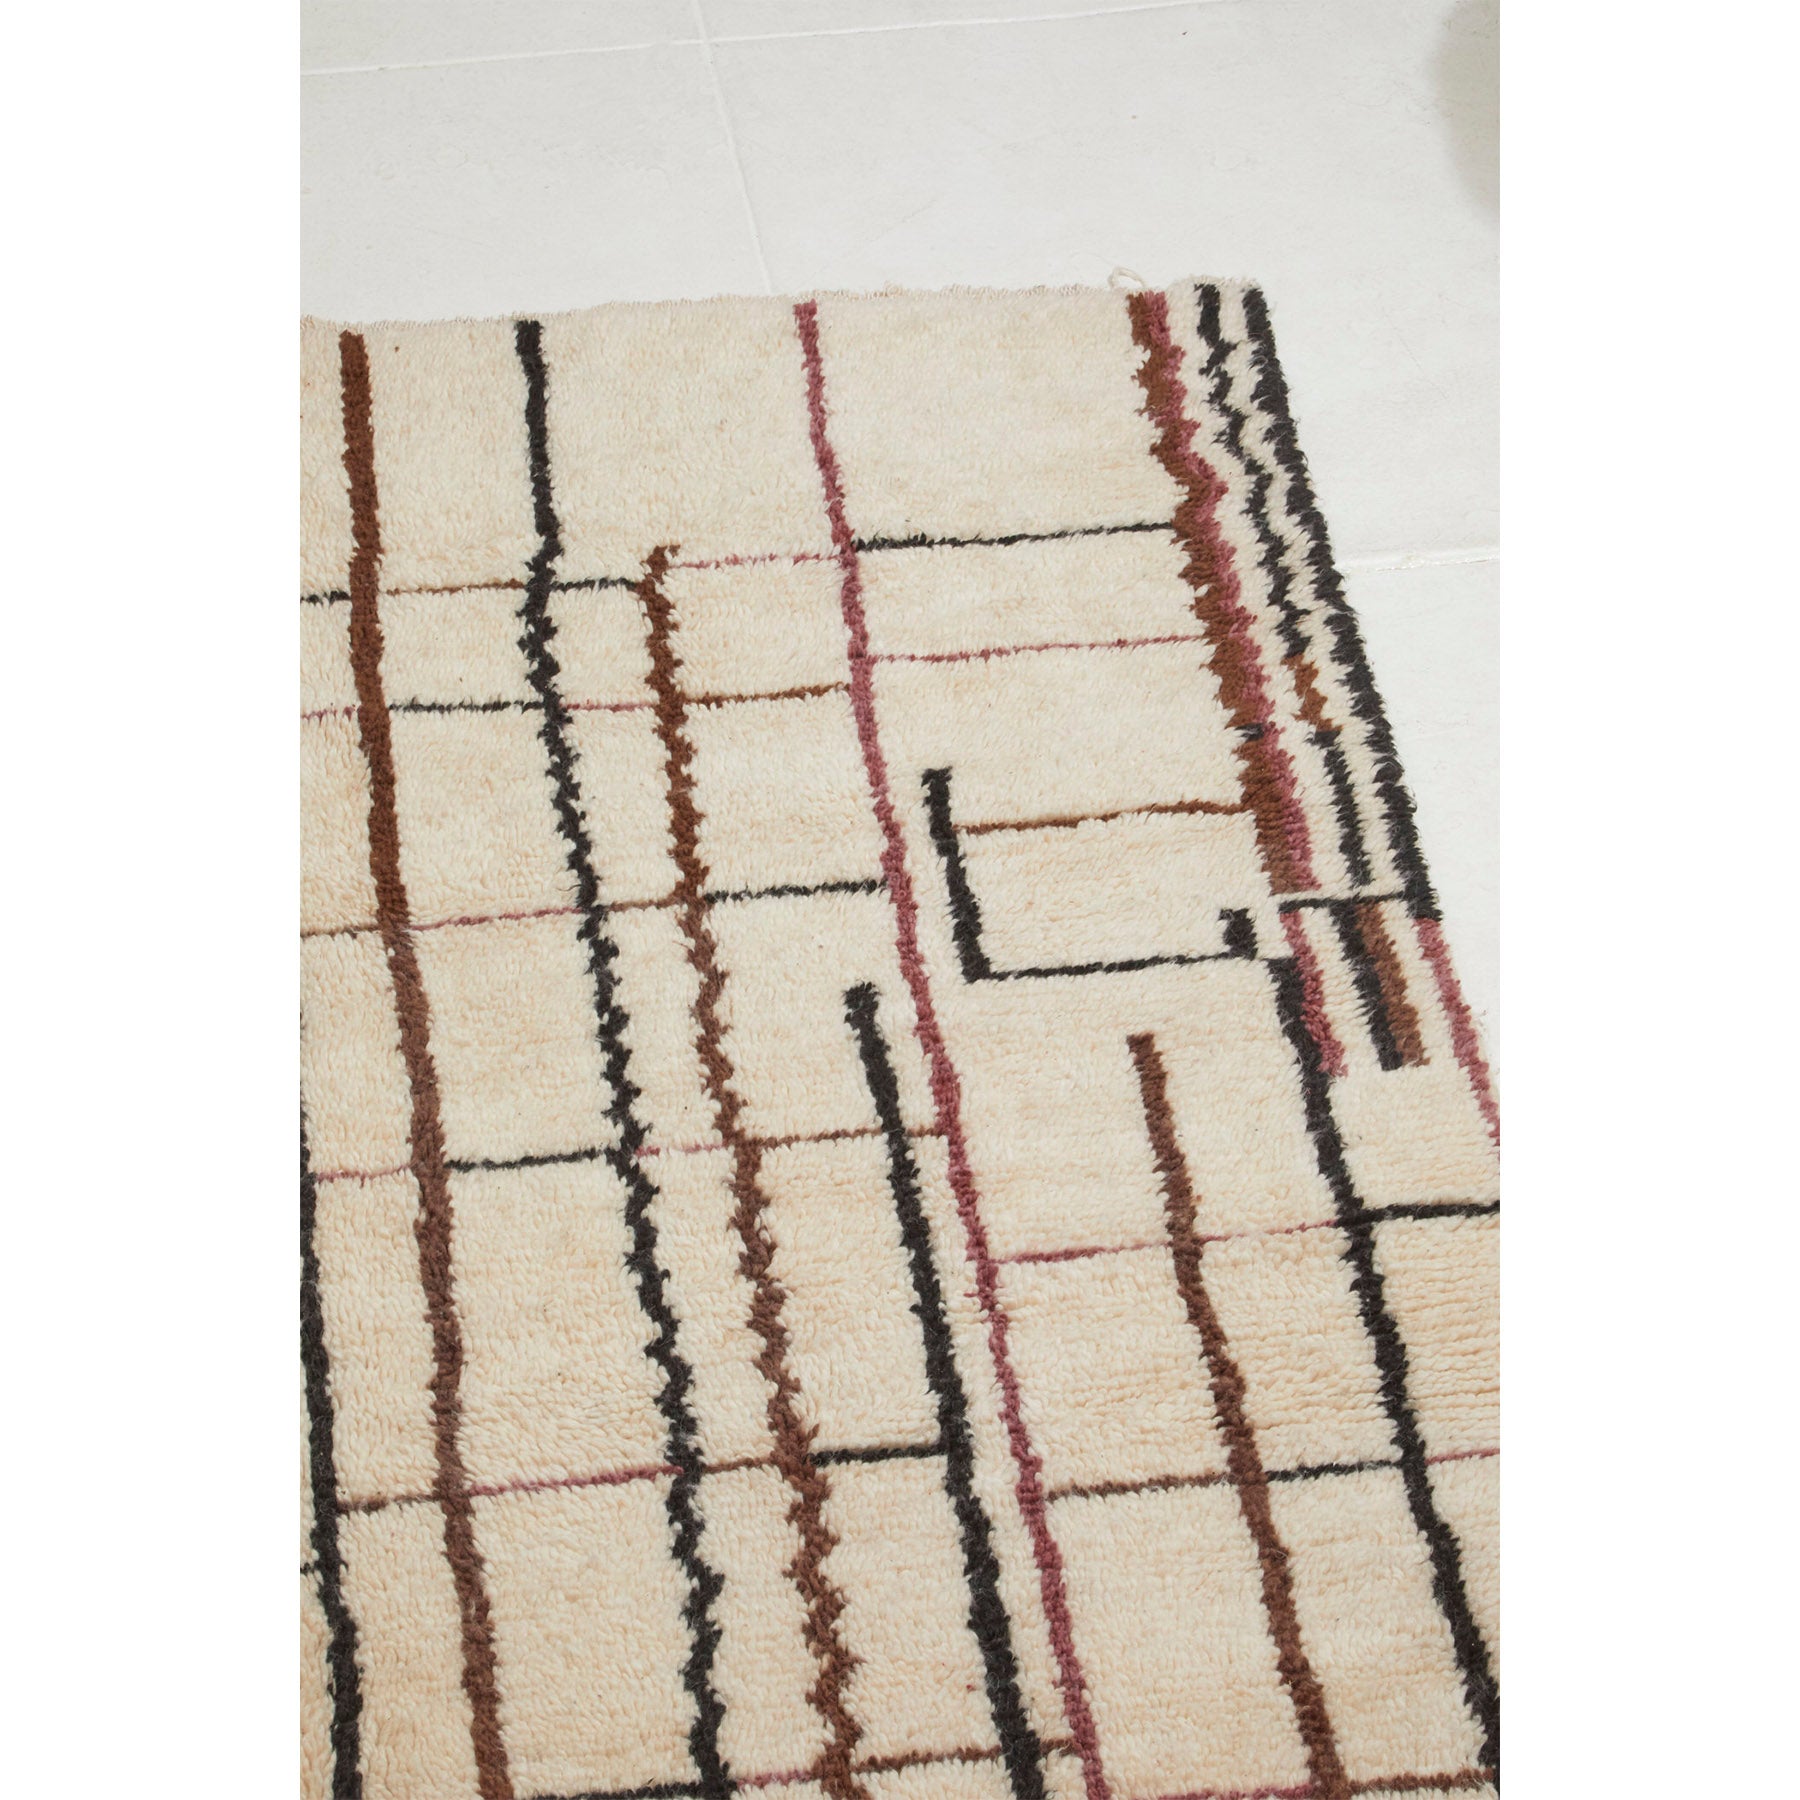 AYADA - Moroccan Azilal rug with black, brown, & blush-colored stripes